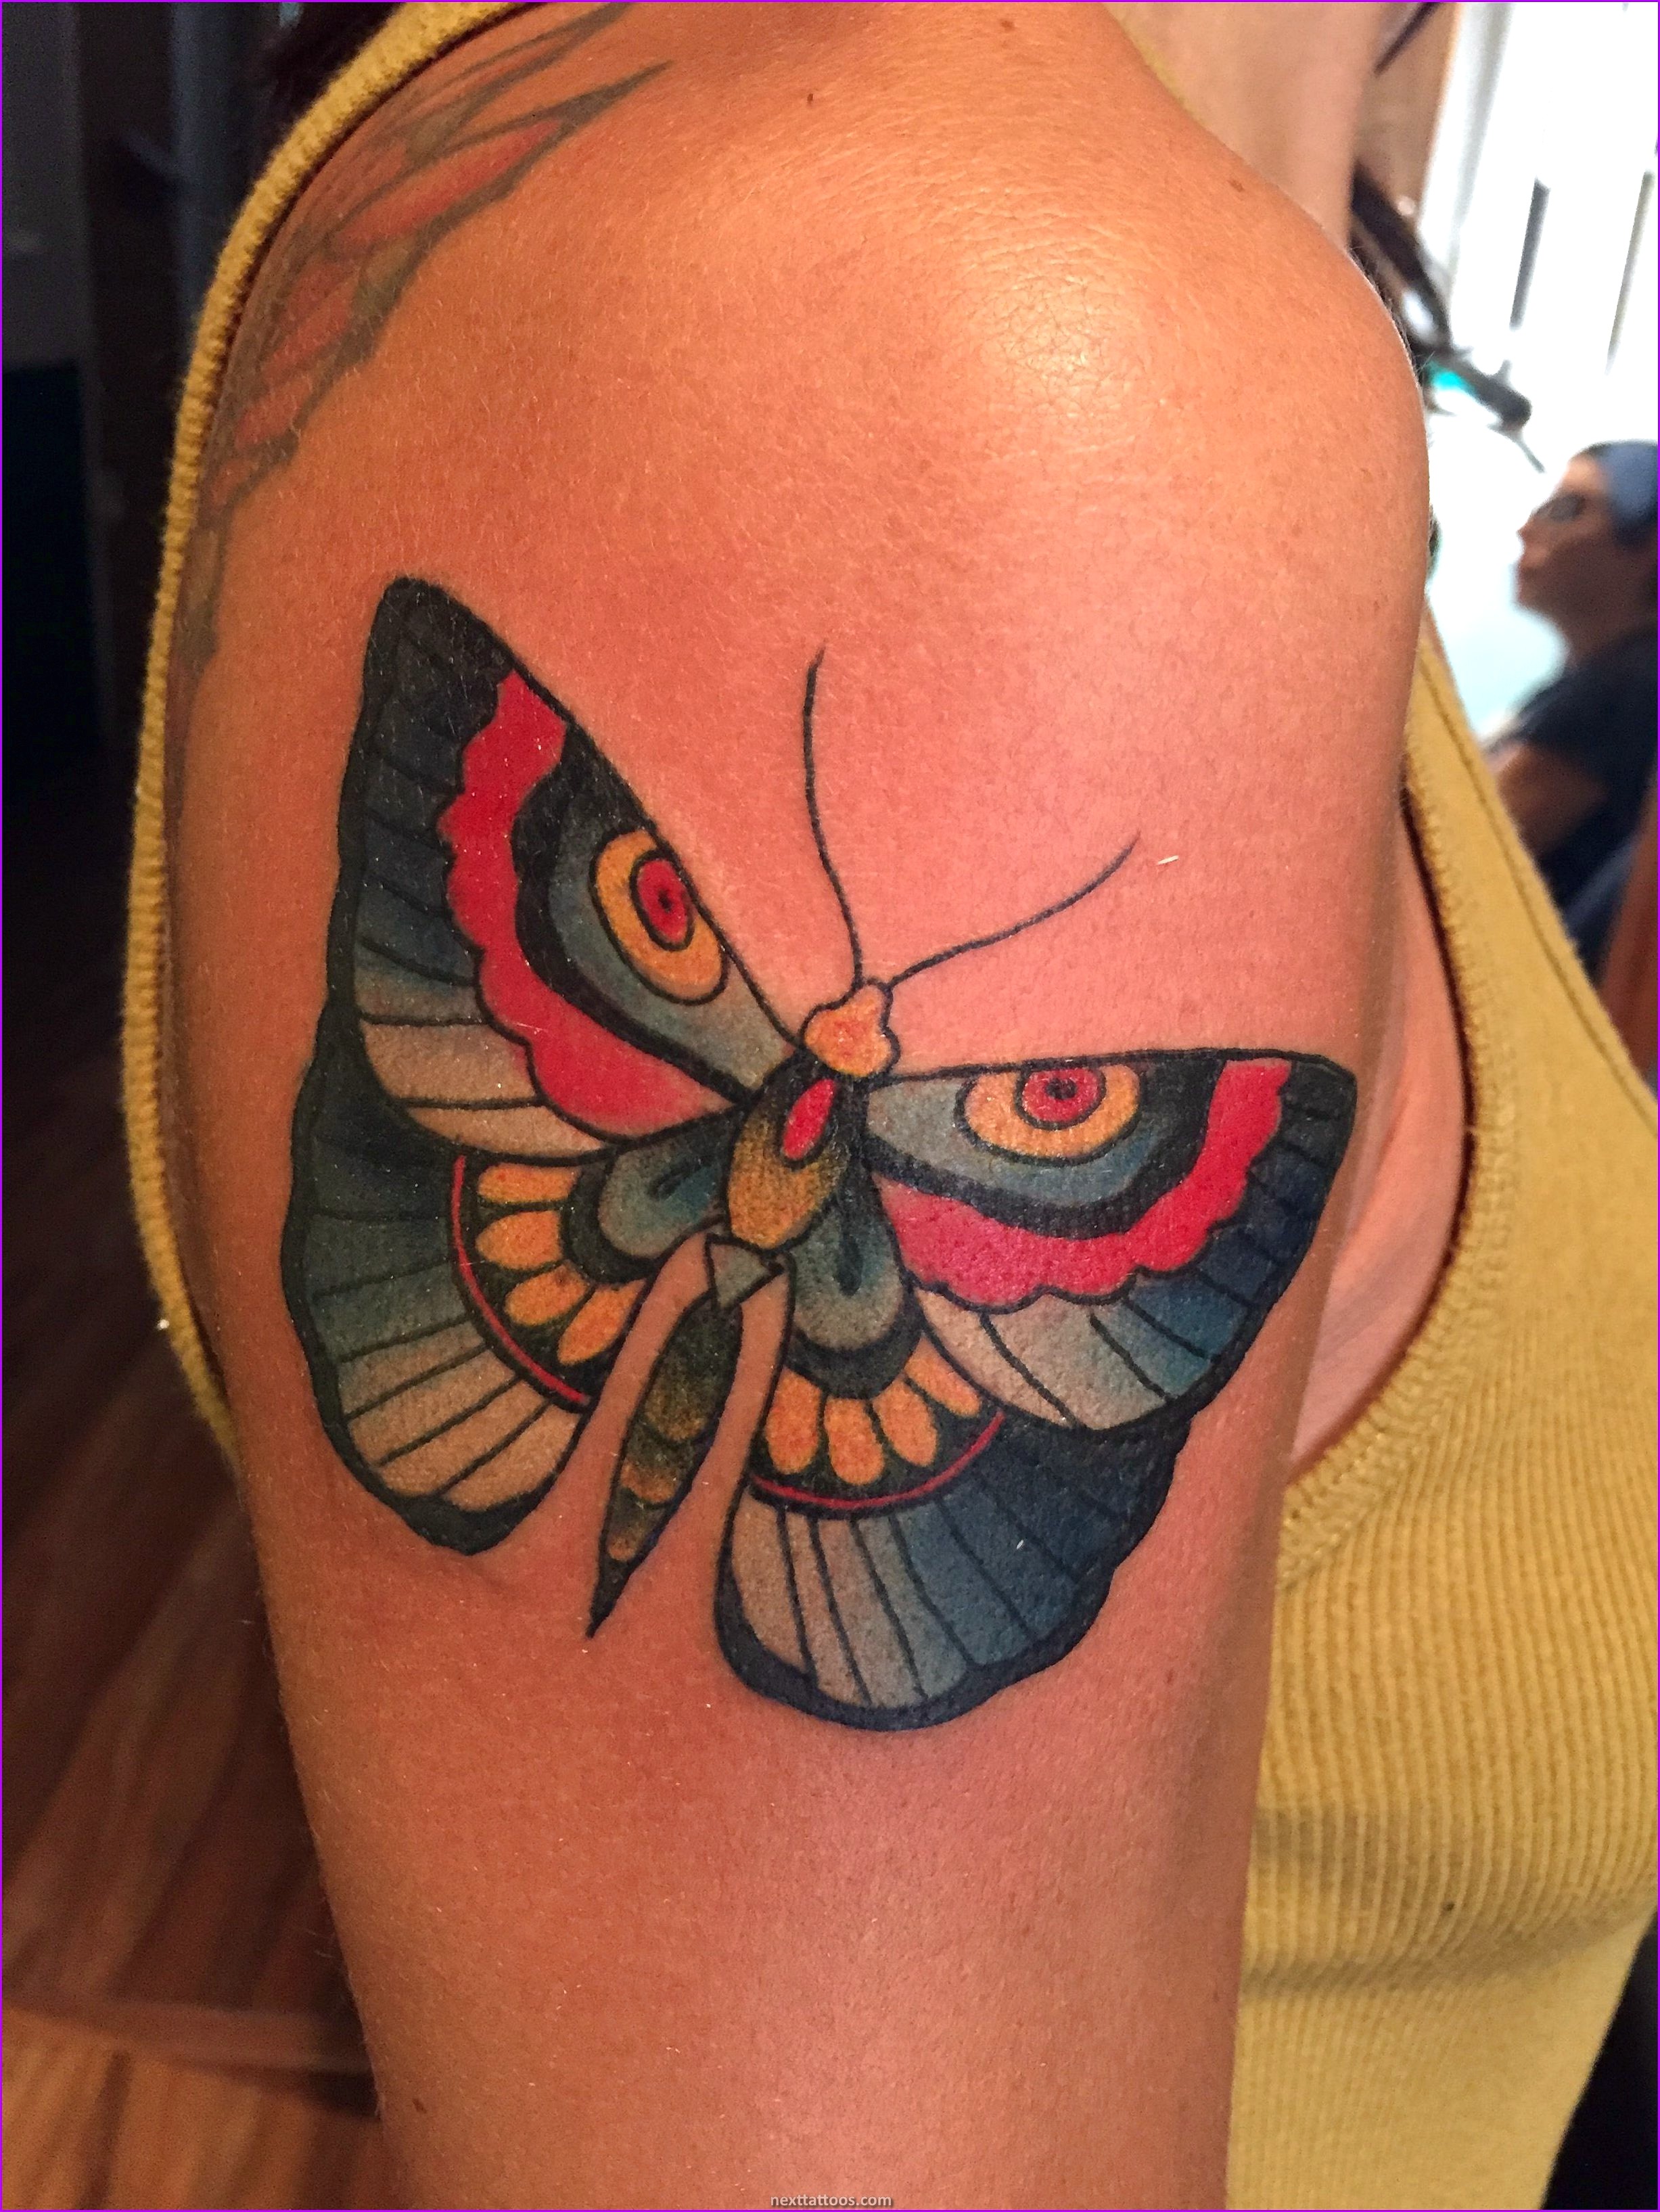 Butterfly Tattoo Men - How to Choose a Butterfly Tattoo Meaning That's Right For You